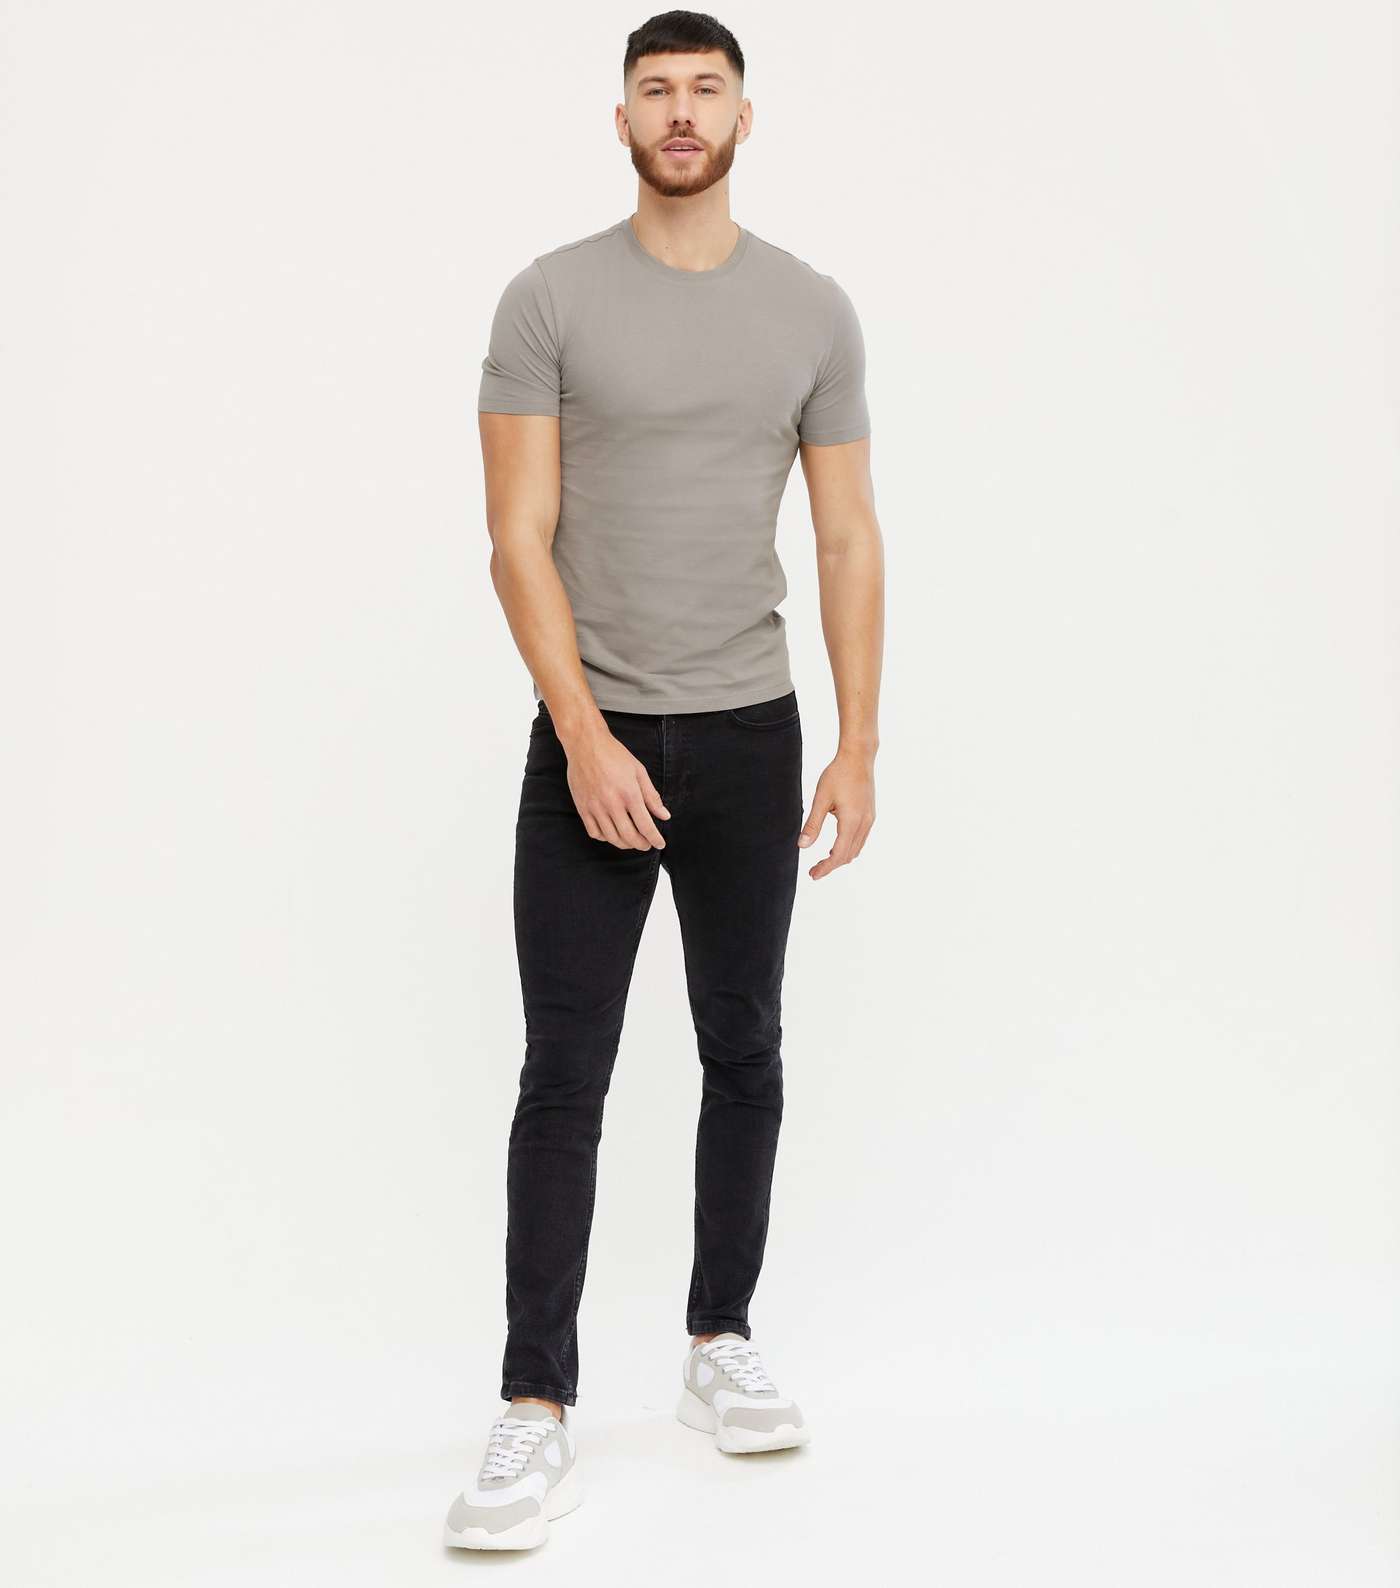 Pale Grey Crew Neck Muscle Fit T-Shirt Image 2